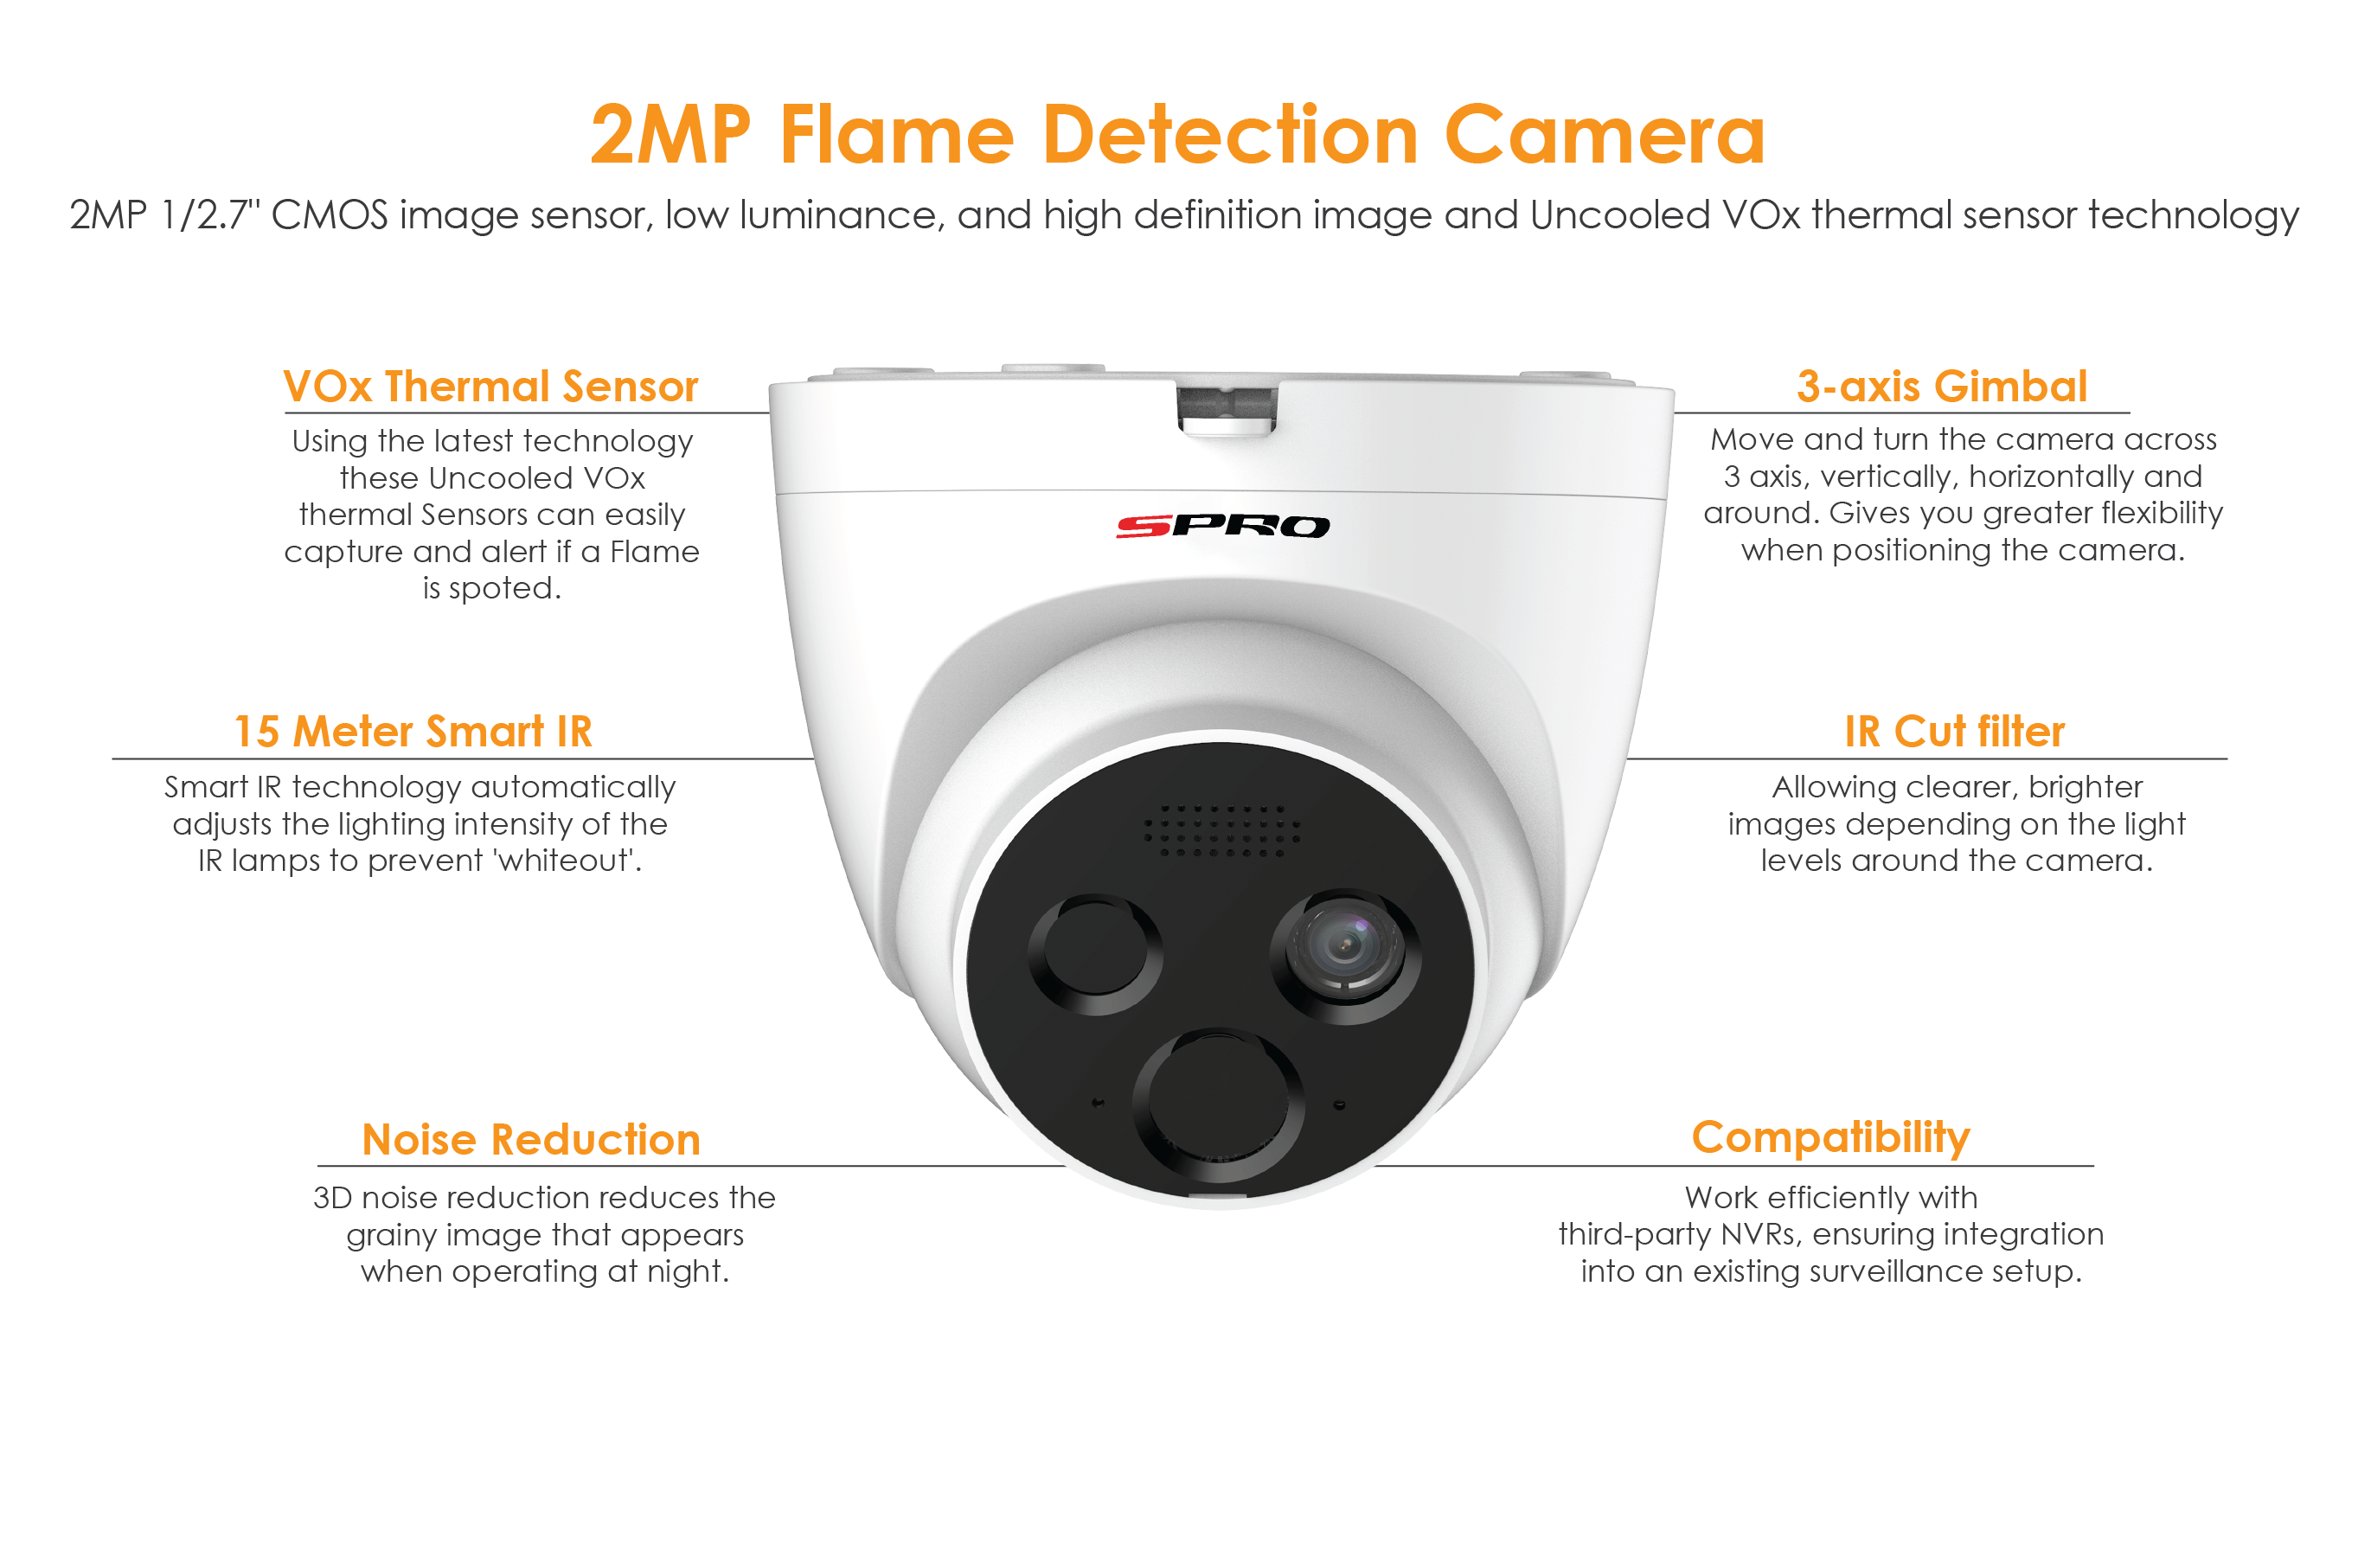 2 MP Flame Detection Camera